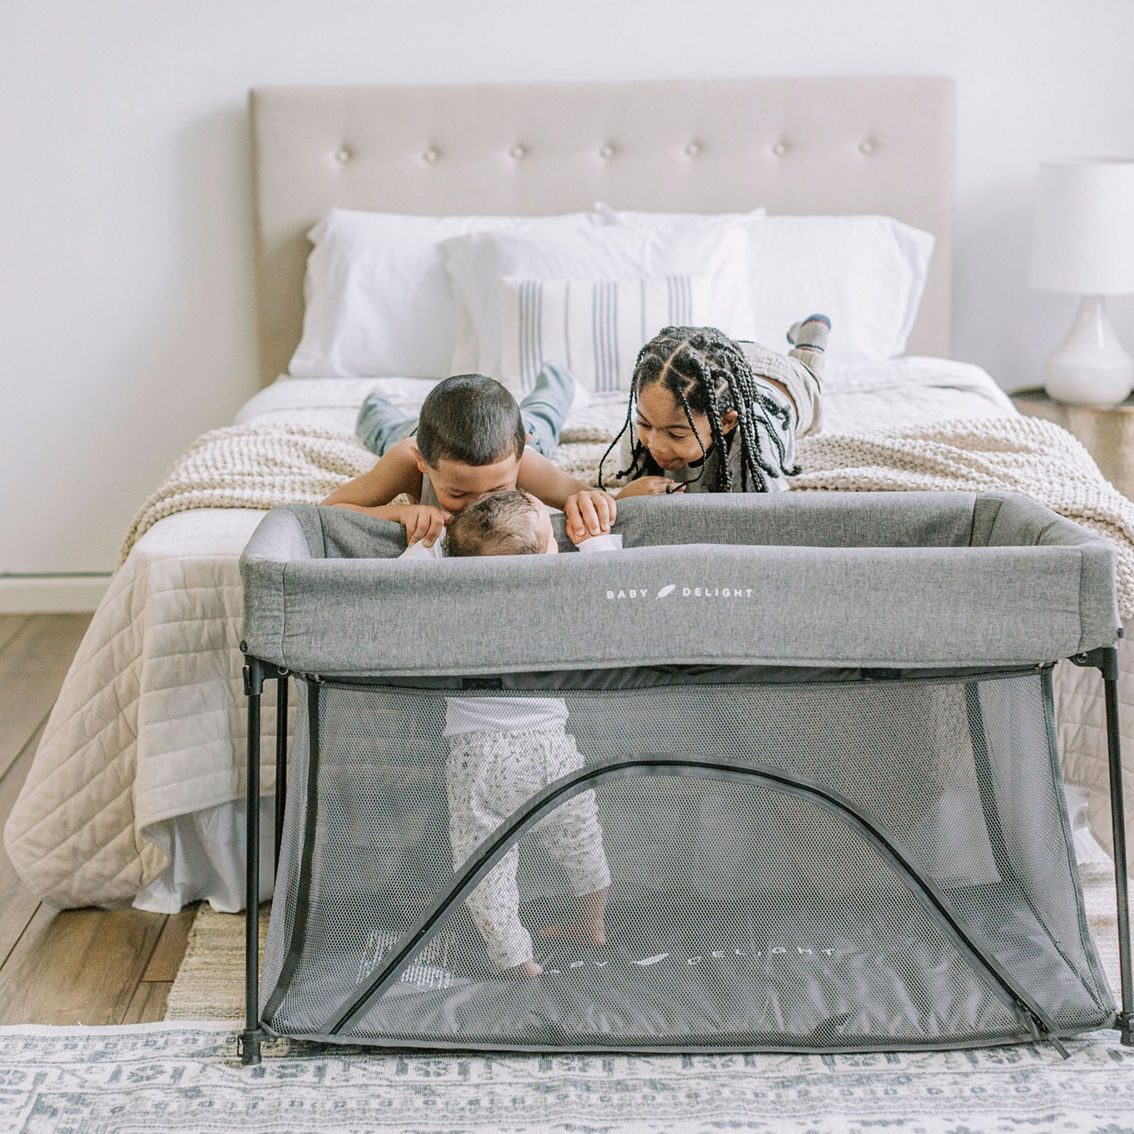 Baby Delight Nod Deluxe Portable Travel Crib, Charcoal Tweed - Image 2 of 3